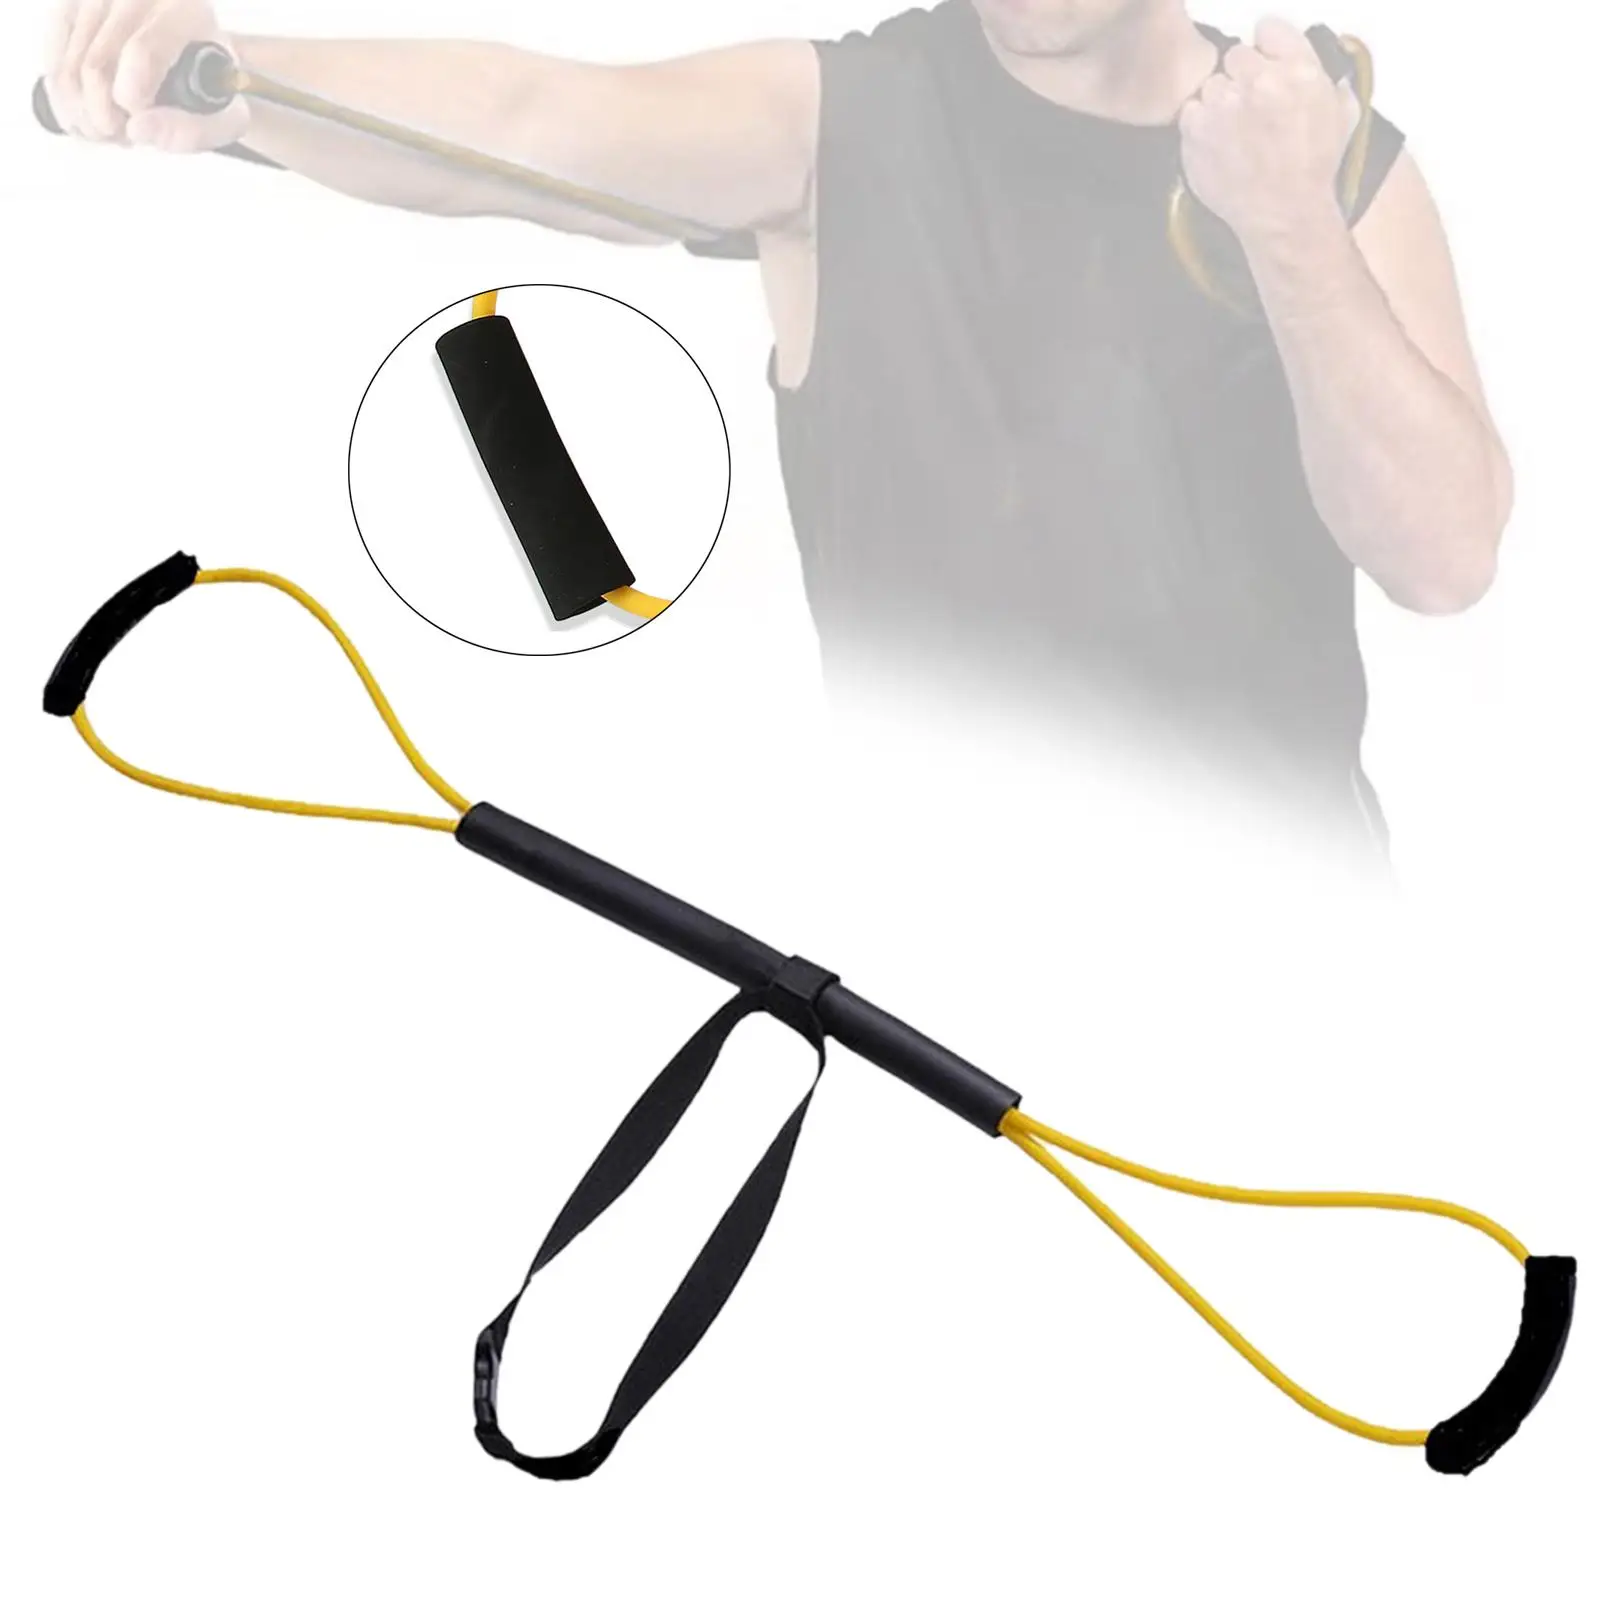 Boxing Resistance Bands Exercise Bands Pulling Rope Lightweight Exercise Equipment Boxing Equipment for Karate Shadow Boxing